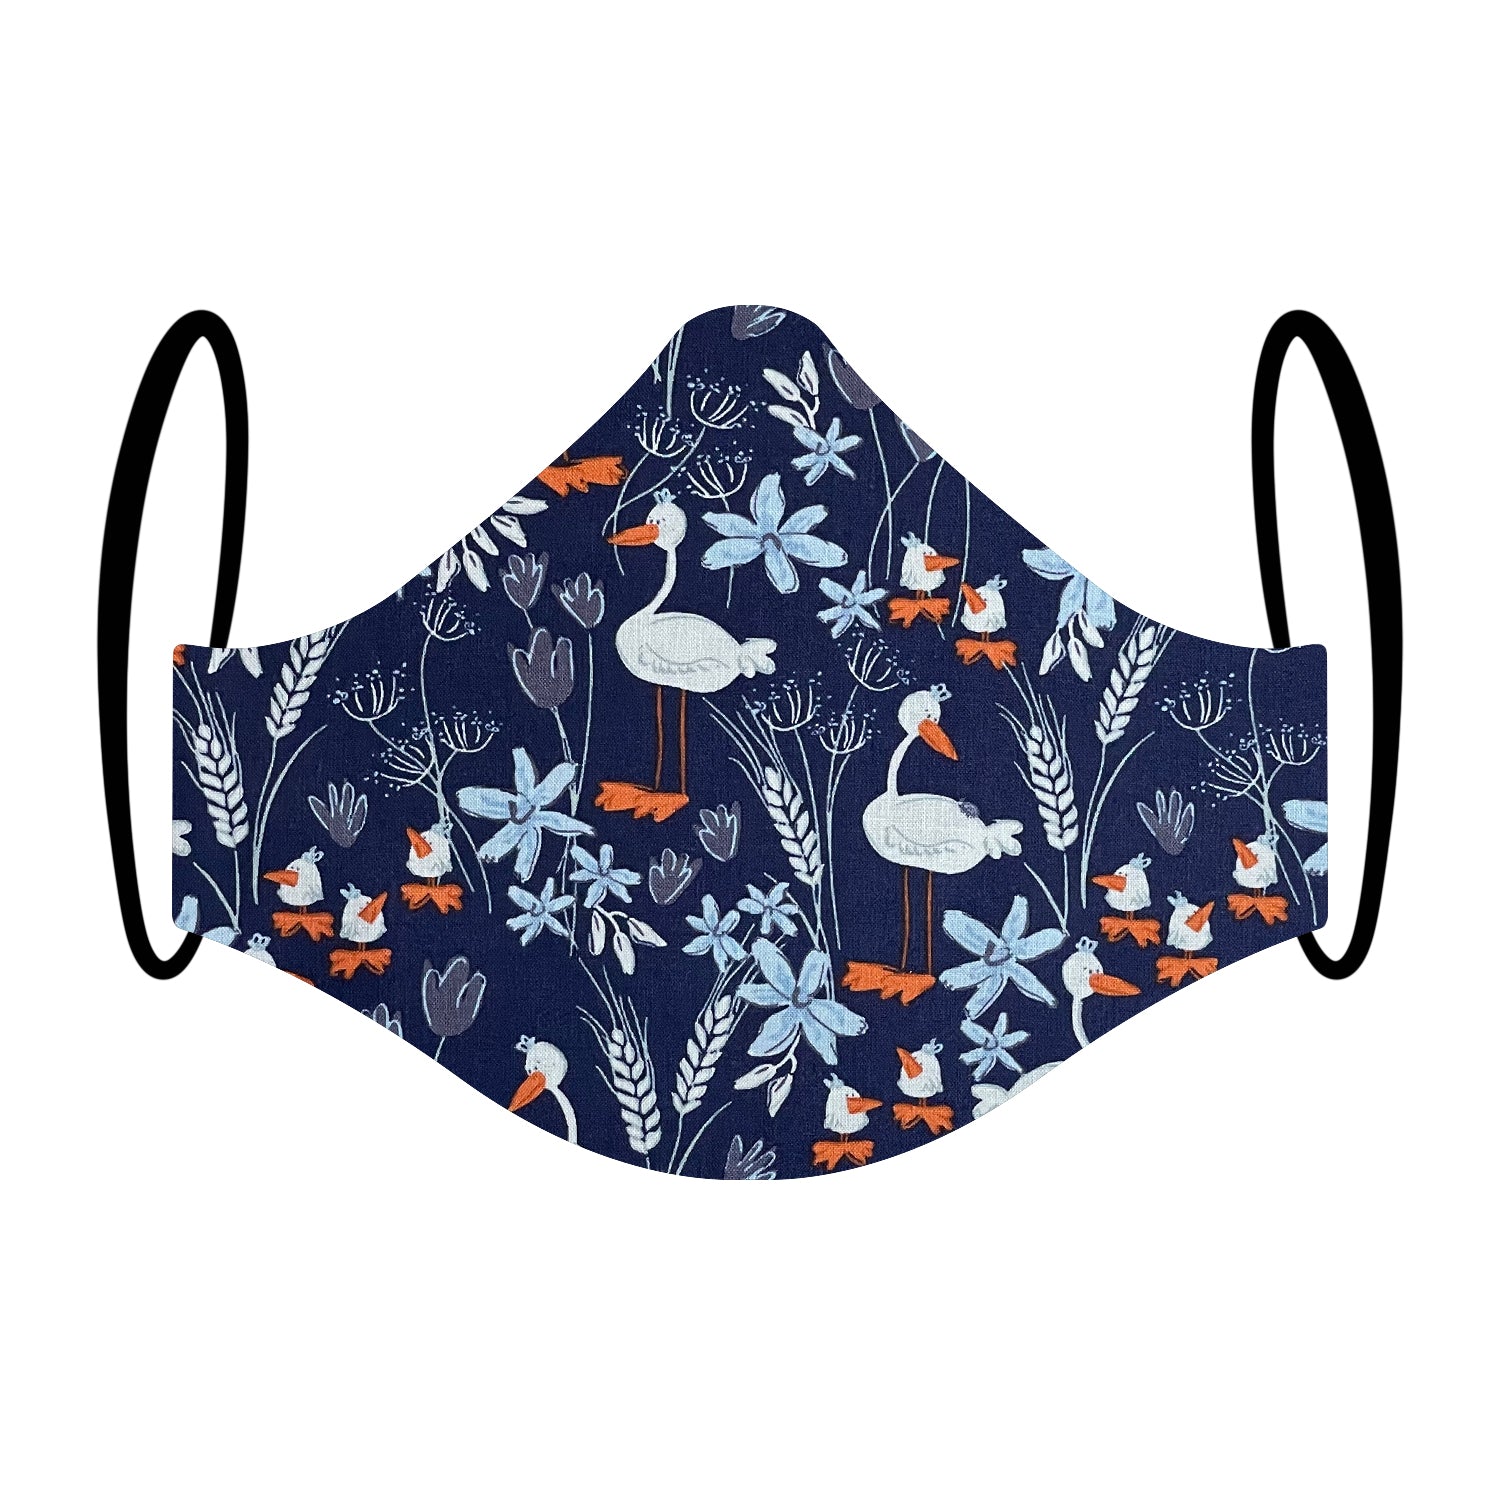 "Shake Your Goose Feathers" Print Triple-layer Washable Face Mask 